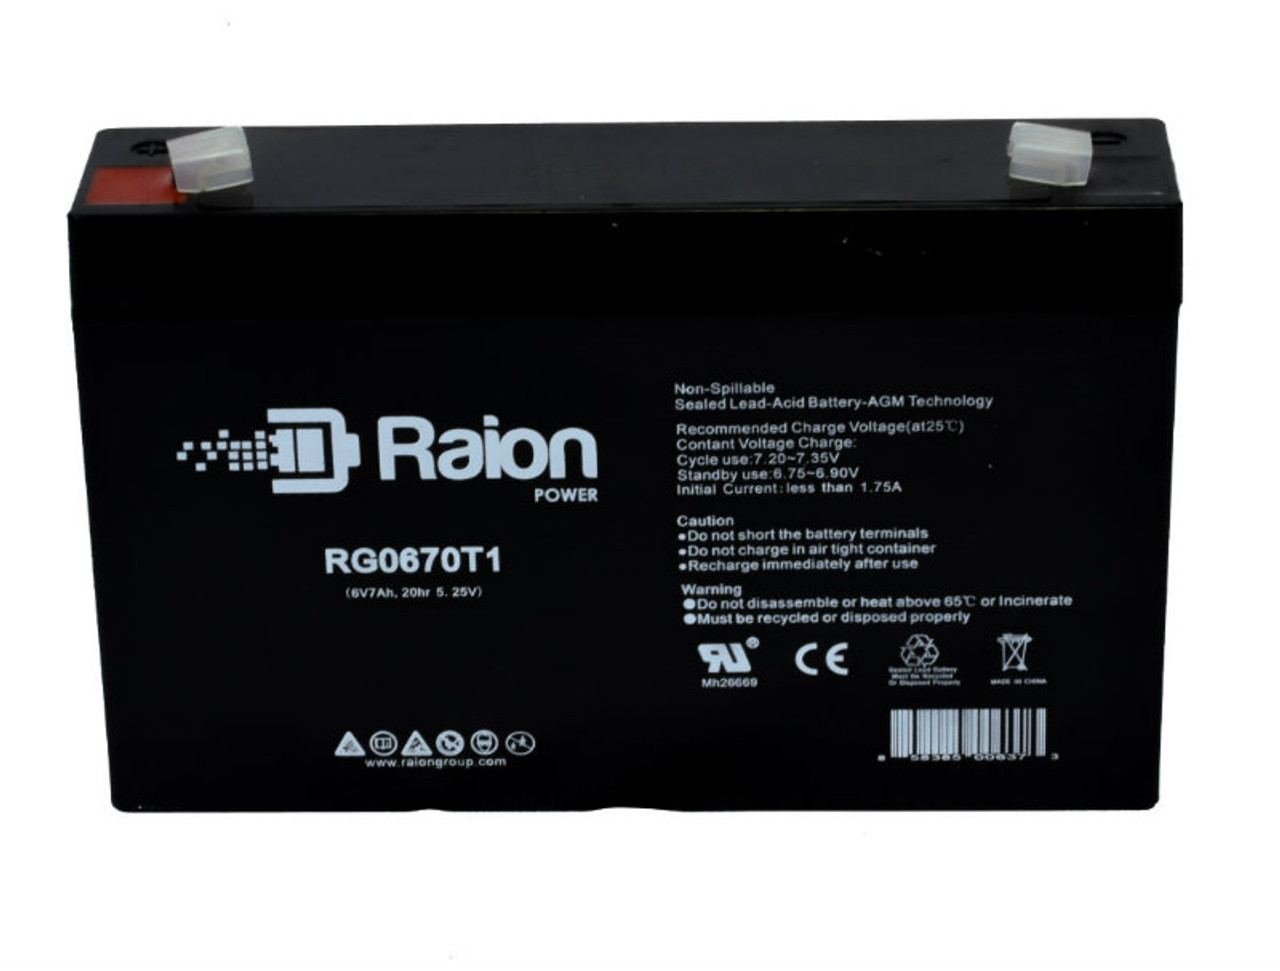 Raion Power RG0670T1 Replacement Battery Cartridge for Light Alarms PB28D